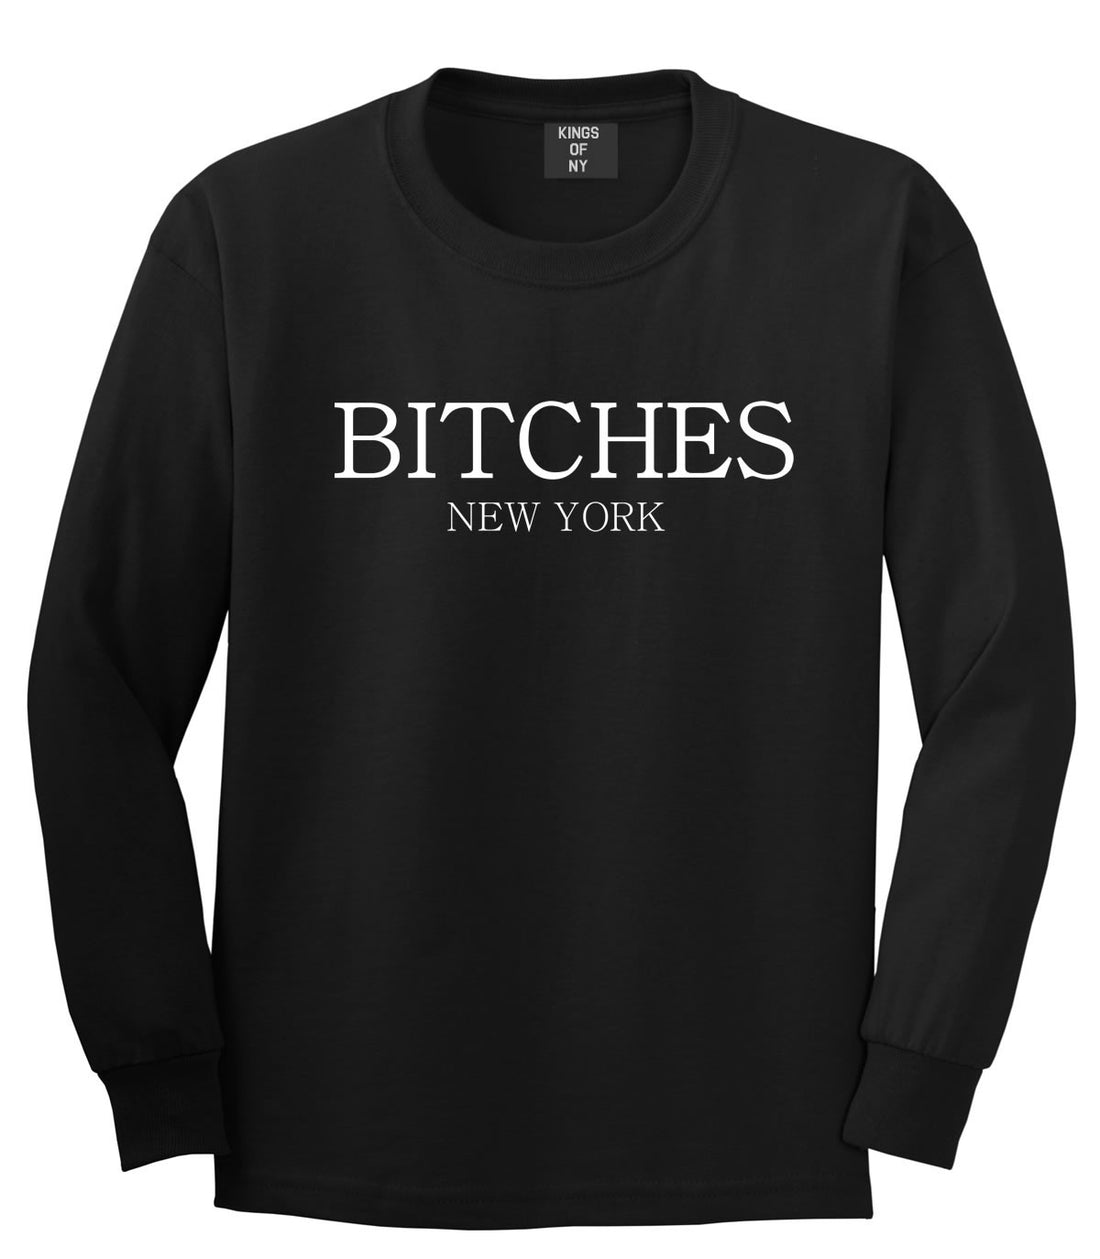  Bitches New York Long Sleeve T-Shirt in Black by Kings Of NY